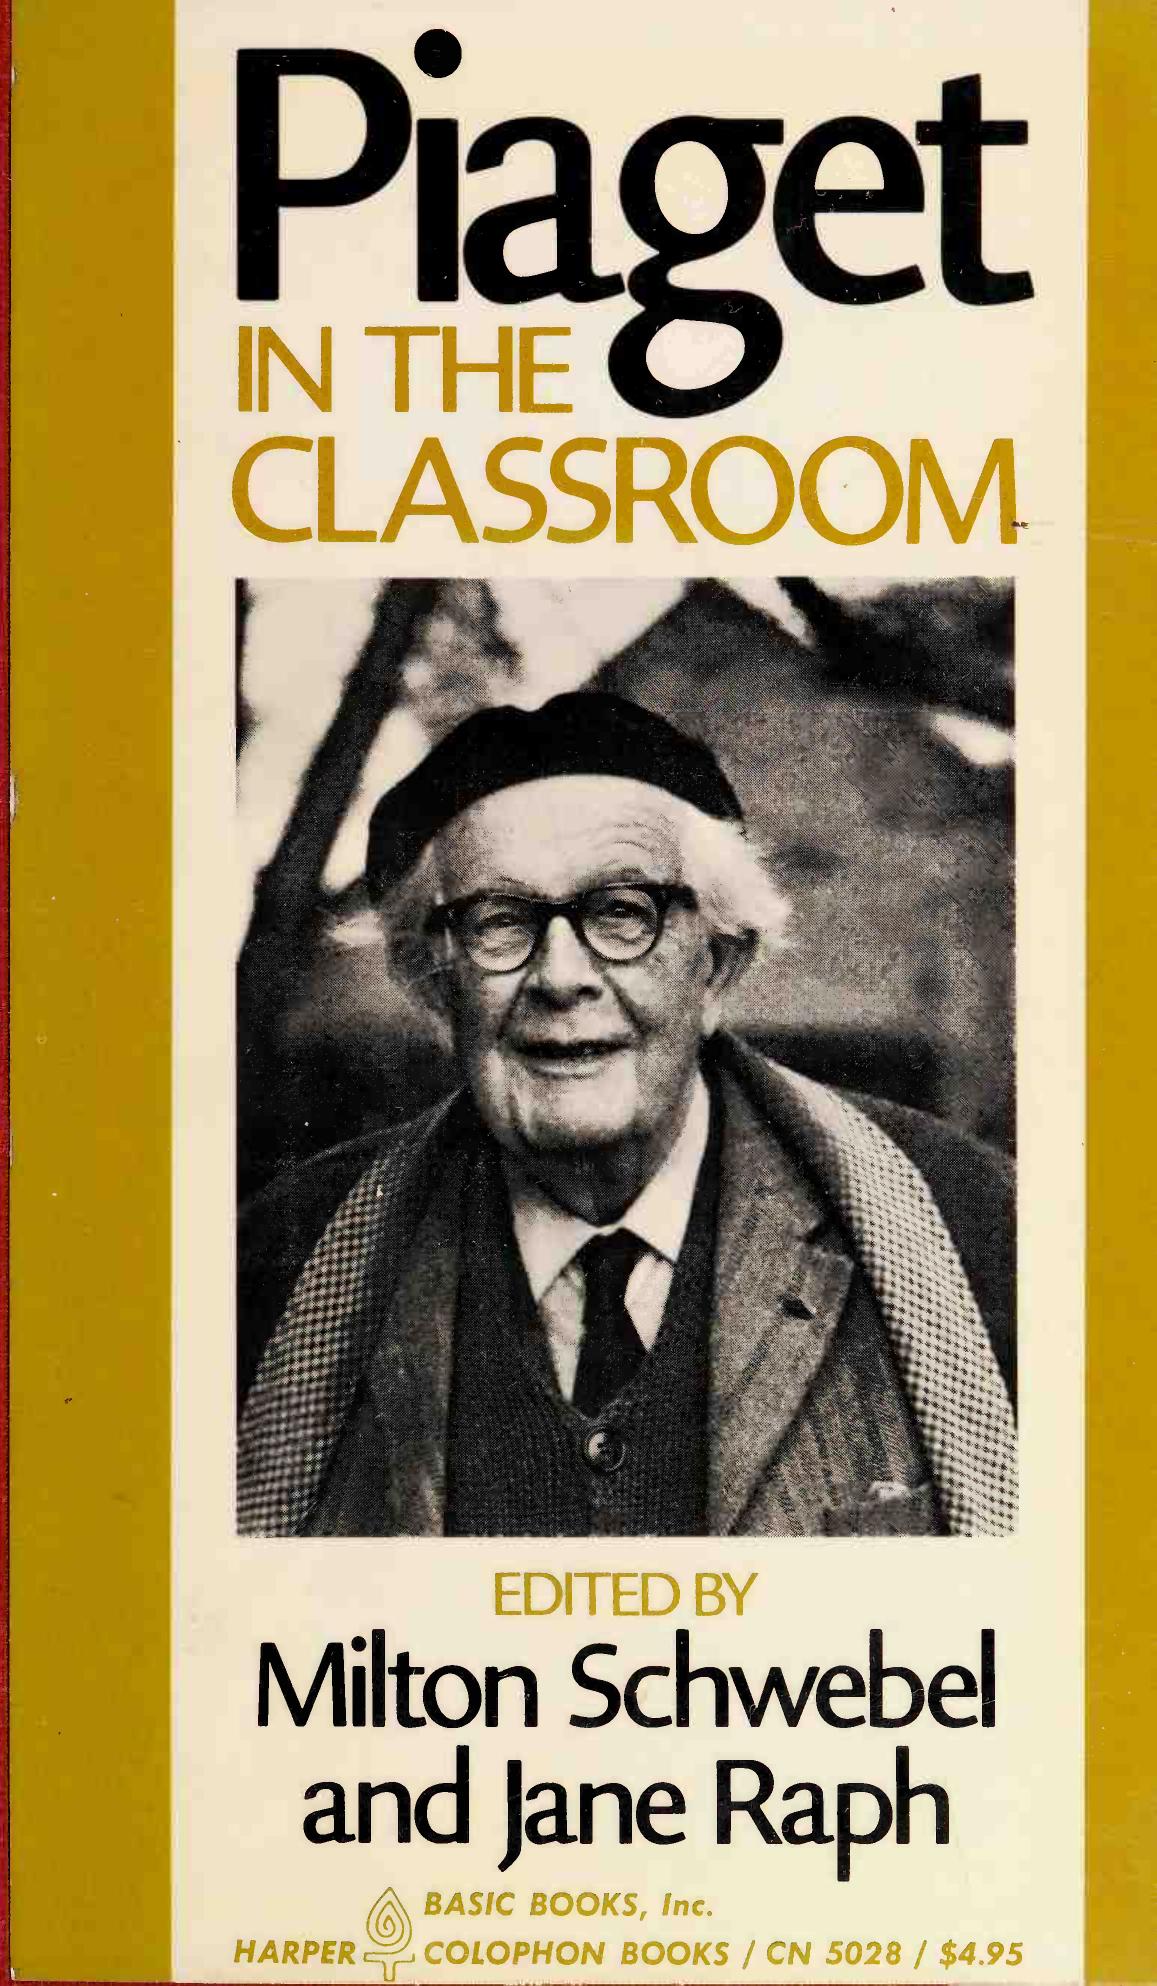 Piaget in Classroom